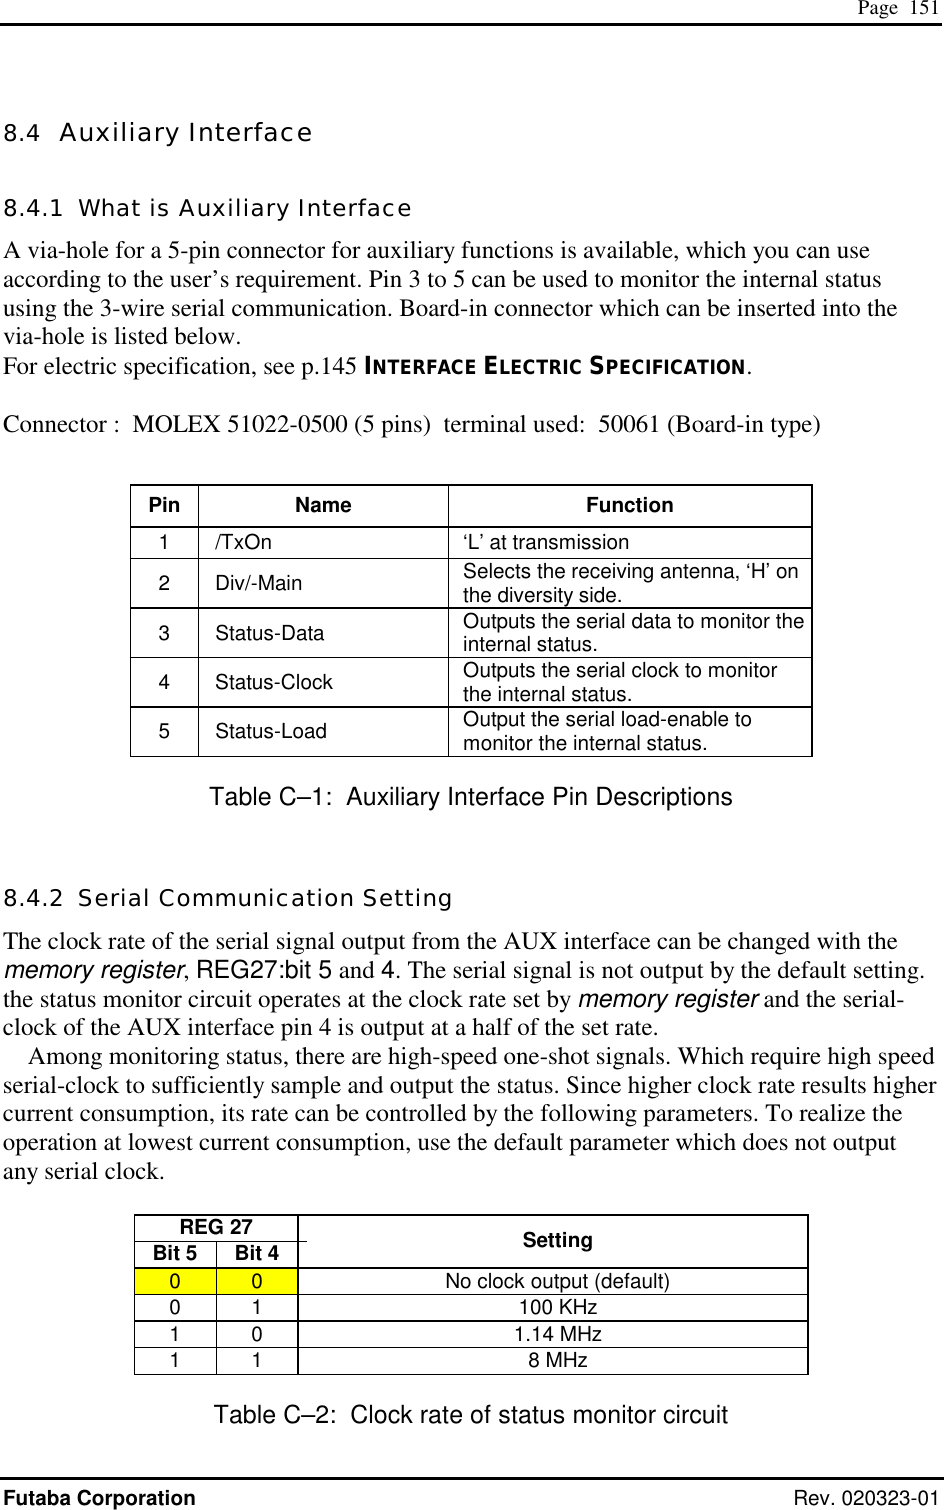  Page  151 Futaba Corporation Rev. 020323-01 8.4  Auxiliary Interface 8.4.1  What is Auxiliary Interface A via-hole for a 5-pin connector for auxiliary functions is available, which you can use according to the user’s requirement. Pin 3 to 5 can be used to monitor the internal status using the 3-wire serial communication. Board-in connector which can be inserted into the via-hole is listed below. For electric specification, see p.145 INTERFACE ELECTRIC SPECIFICATION.  Connector :  MOLEX 51022-0500 (5 pins)  terminal used:  50061 (Board-in type)  Pin Name  Function 1    /TxOn    ‘L’ at transmission 2  Div/-Main   Selects the receiving antenna, ‘H’ on the diversity side. 3  Status-Data   Outputs the serial data to monitor the internal status. 4  Status-Clock   Outputs the serial clock to monitor the internal status. 5  Status-Load   Output the serial load-enable to monitor the internal status. Table C–1:  Auxiliary Interface Pin Descriptions 8.4.2  Serial Communication Setting The clock rate of the serial signal output from the AUX interface can be changed with the memory register, REG27:bit 5 and 4. The serial signal is not output by the default setting.   the status monitor circuit operates at the clock rate set by memory register and the serial-clock of the AUX interface pin 4 is output at a half of the set rate. Among monitoring status, there are high-speed one-shot signals. Which require high speed serial-clock to sufficiently sample and output the status. Since higher clock rate results higher current consumption, its rate can be controlled by the following parameters. To realize the operation at lowest current consumption, use the default parameter which does not output any serial clock.  REG 27   Bit 5  Bit 4    Setting 0  0    No clock output (default) 0 1   100 KHz 1 0   1.14 MHz 1 1   8 MHz Table C–2:  Clock rate of status monitor circuit 